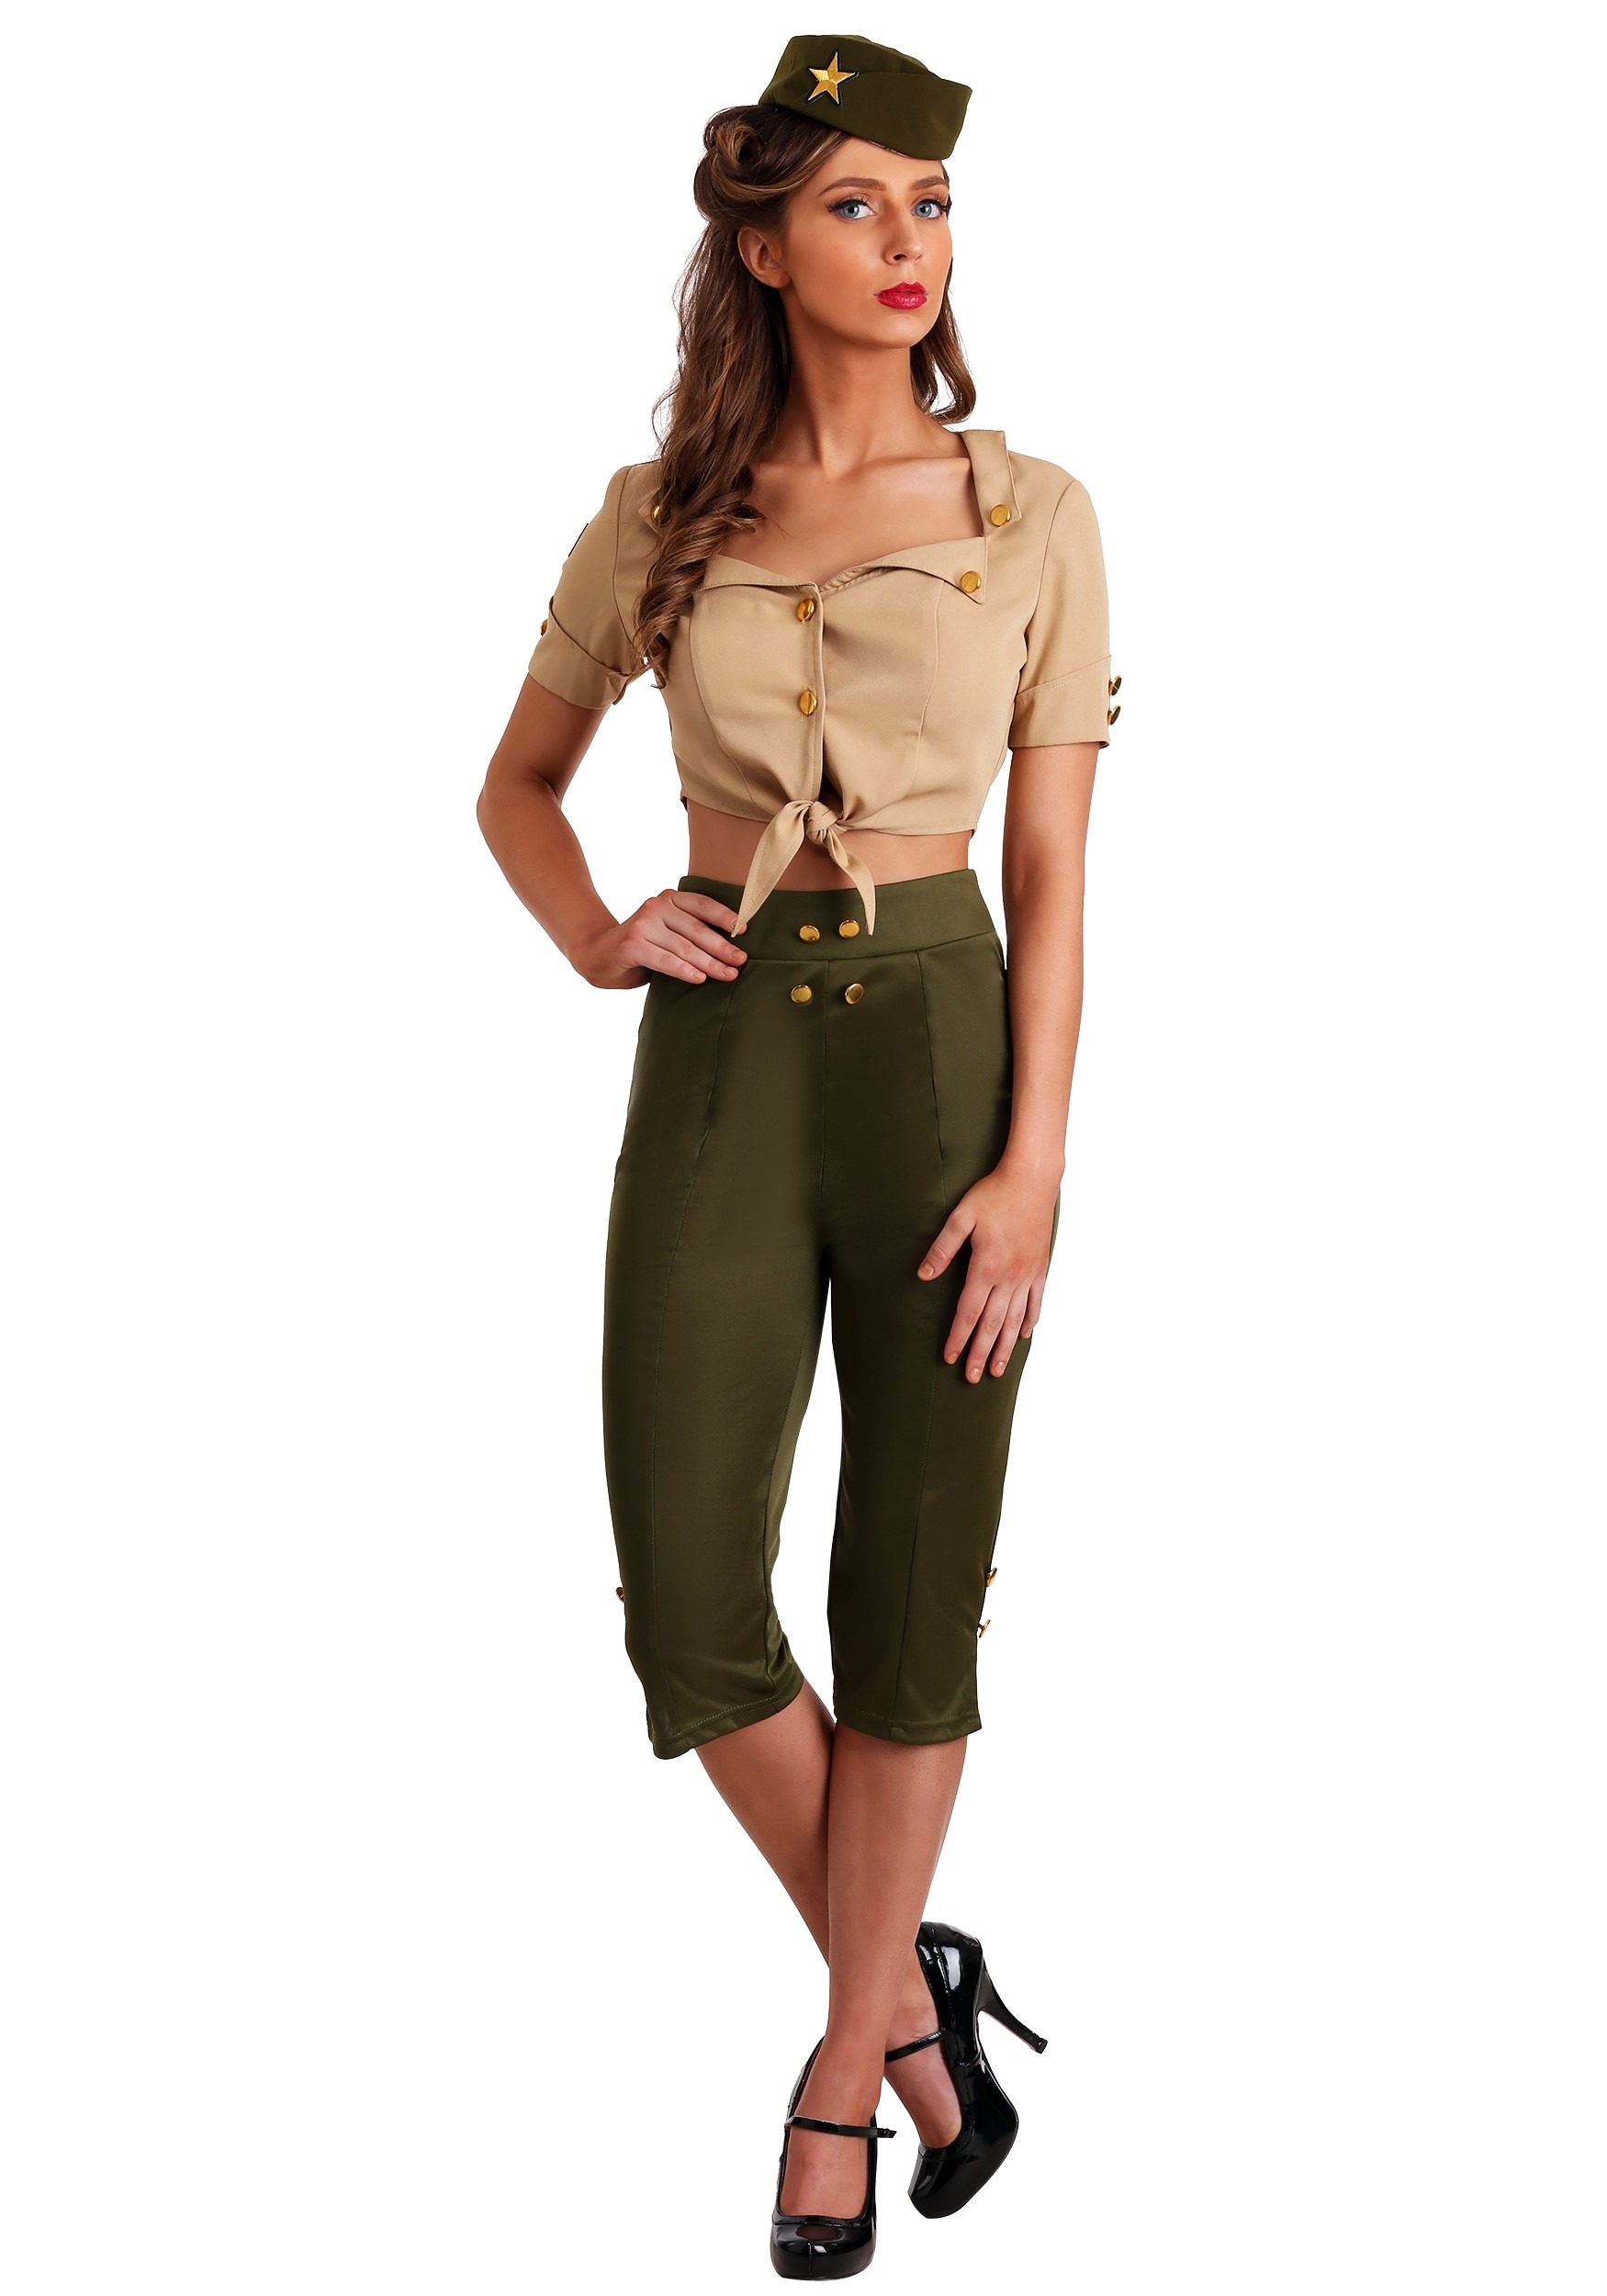 Soldier costume for women. The coolest